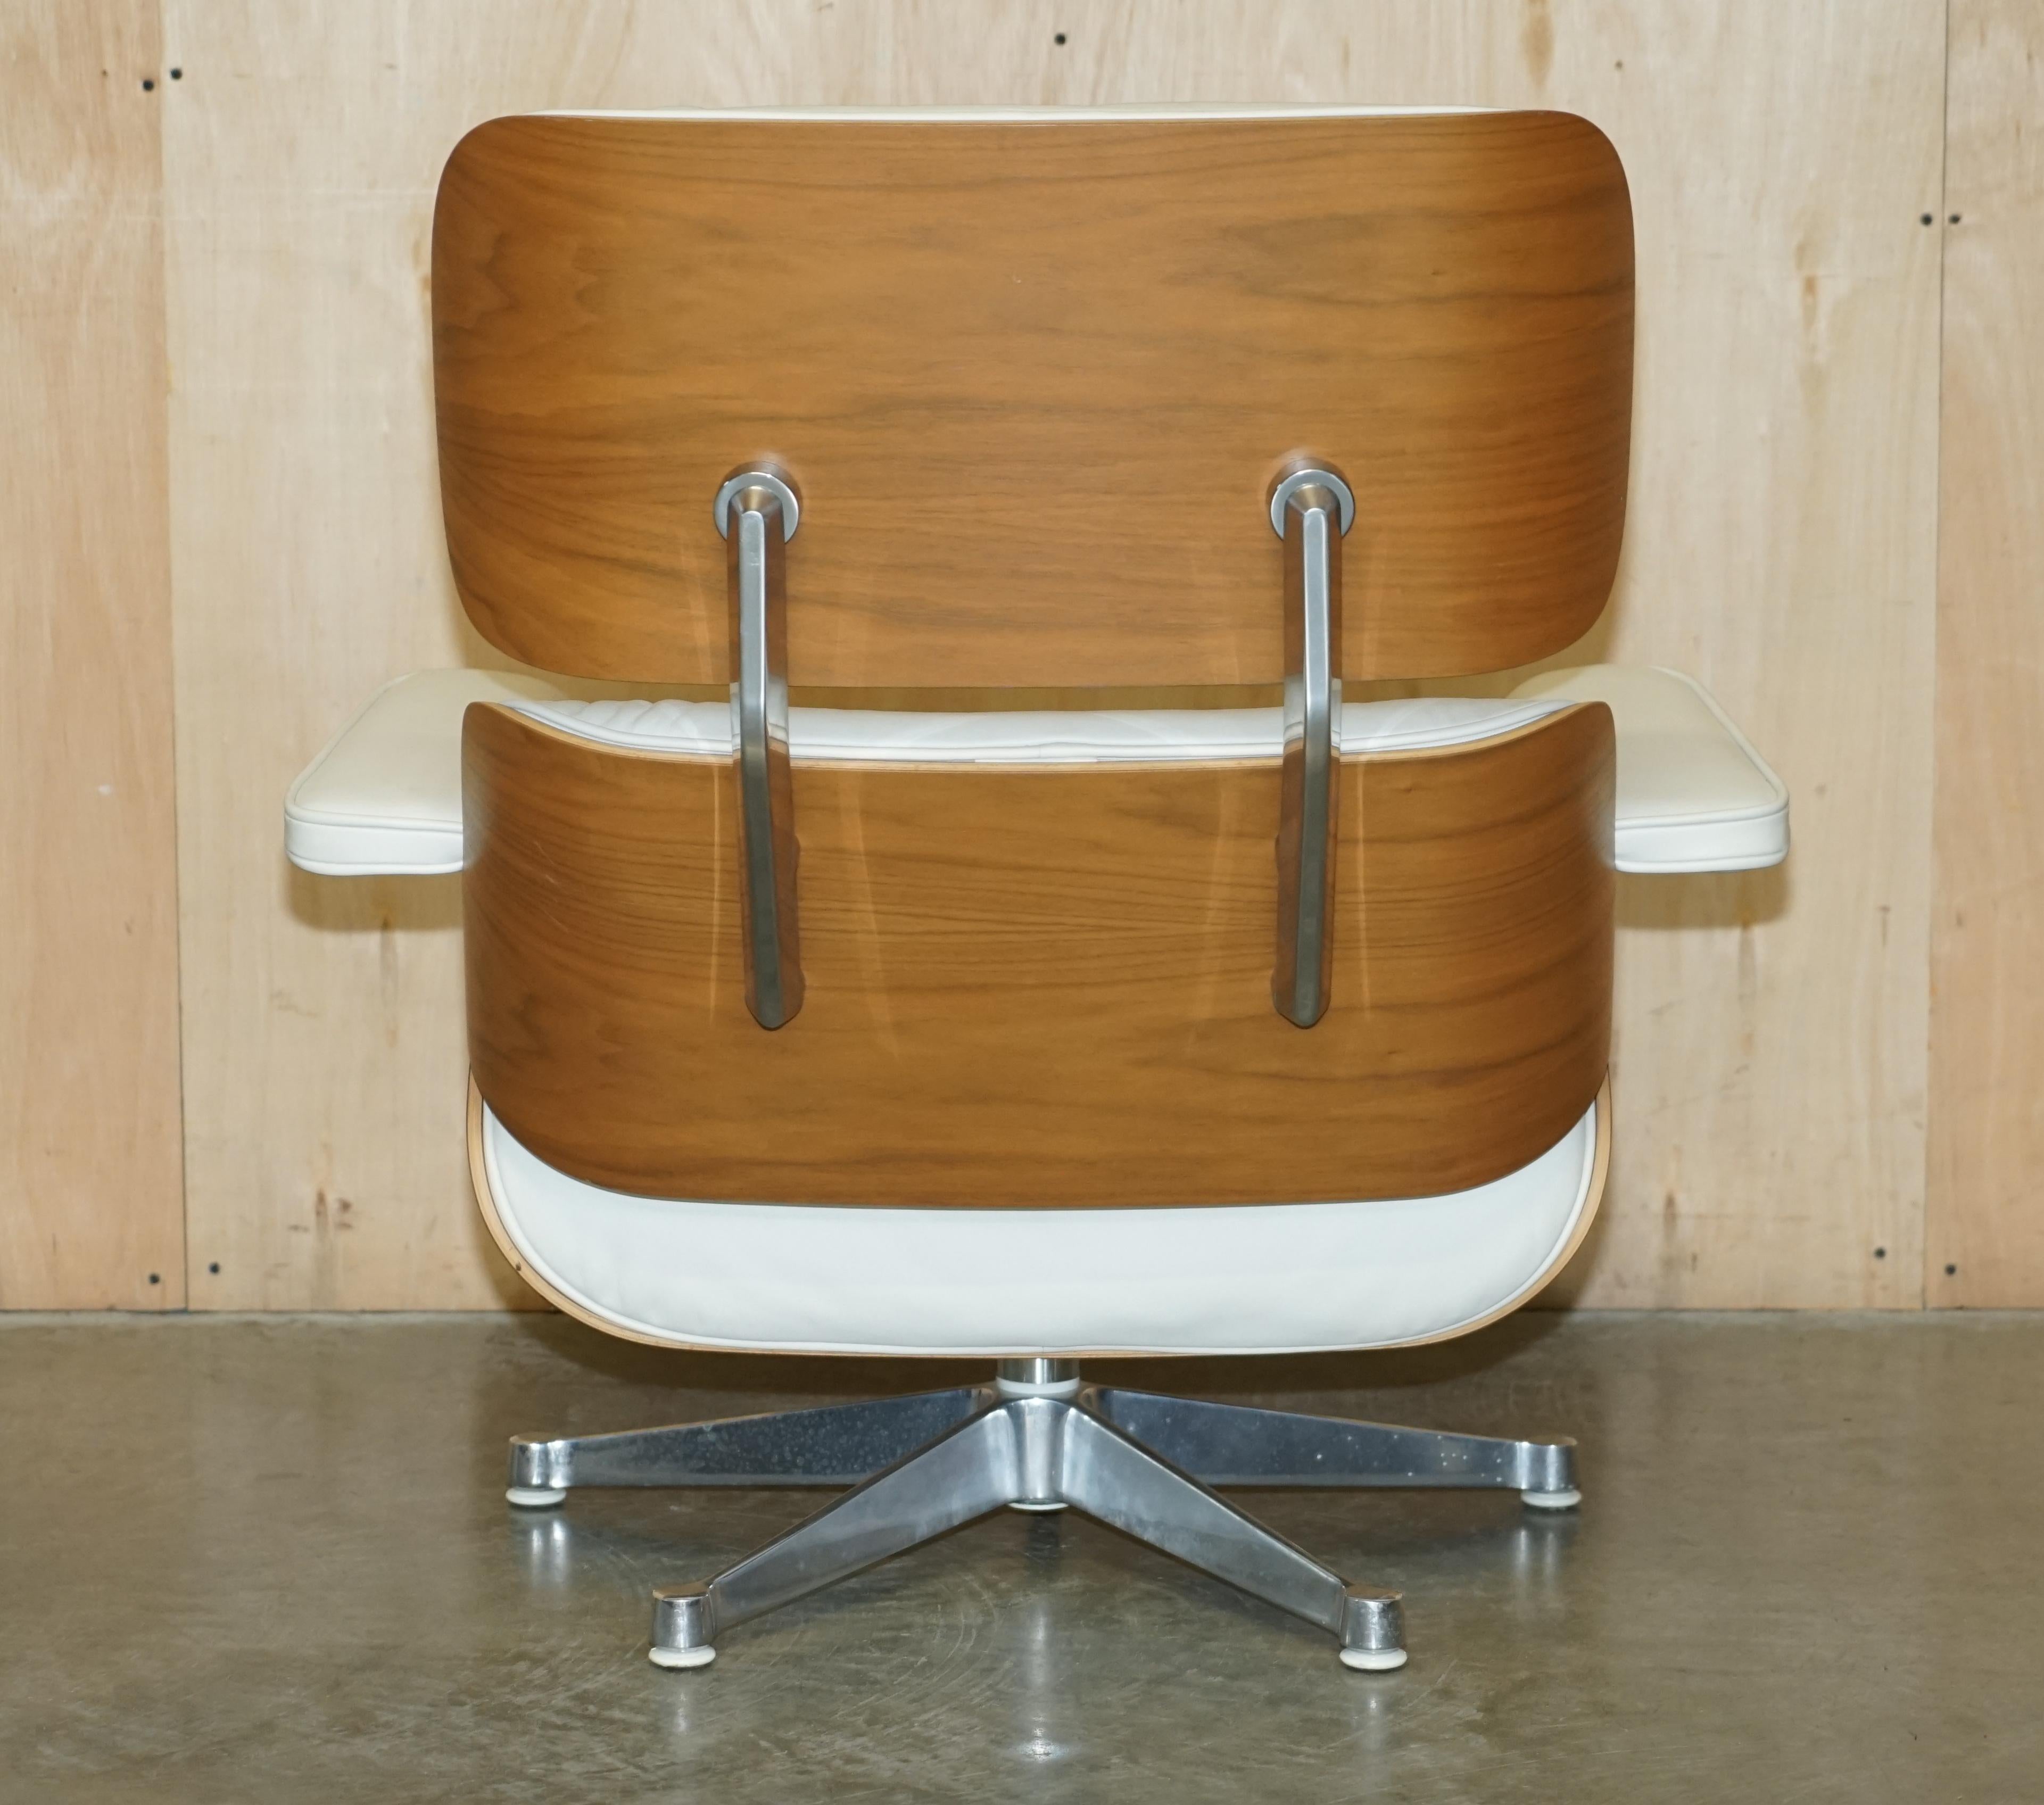 Whiting fauteuil de salon Charles and Ray Eames american cherry wood white leather en vente 11